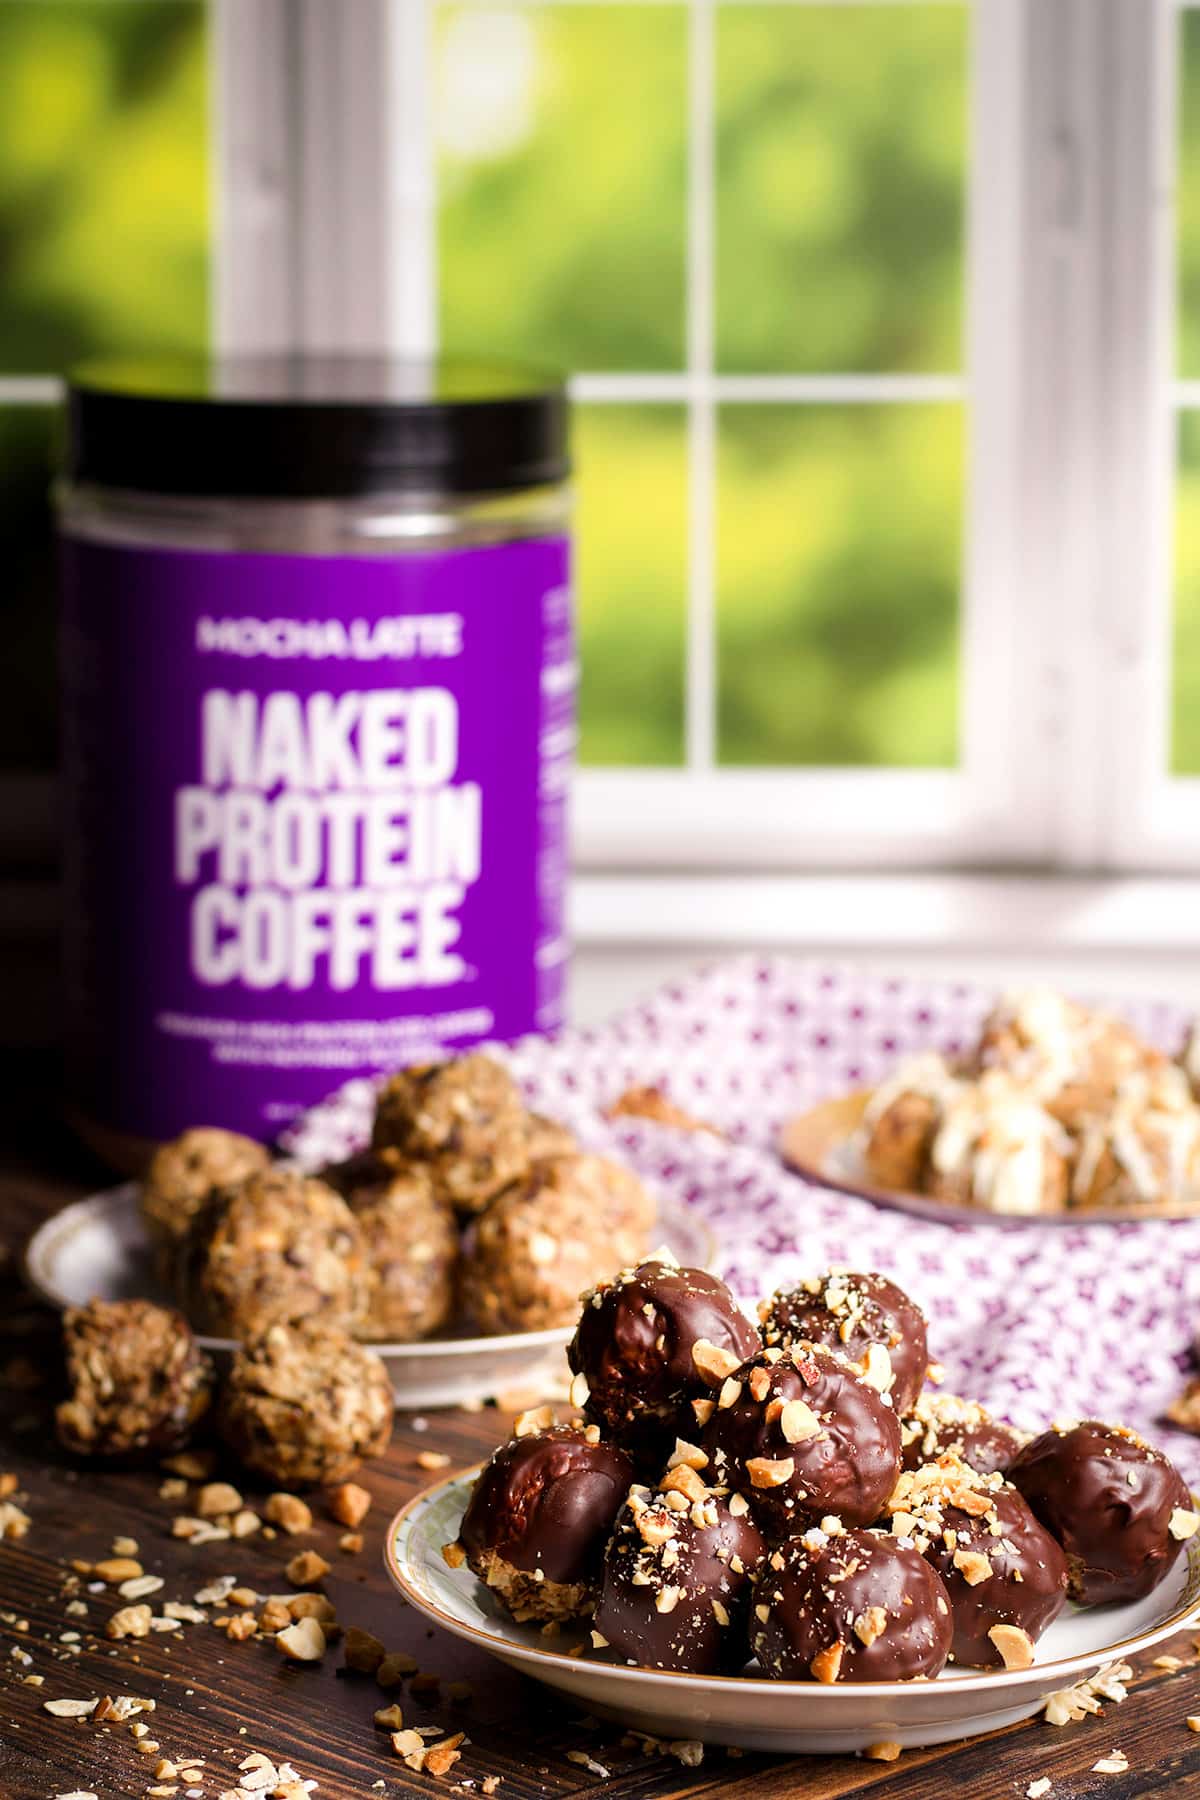 A plate of chocolate covered protein balls sprinkled with chopped peanuts.